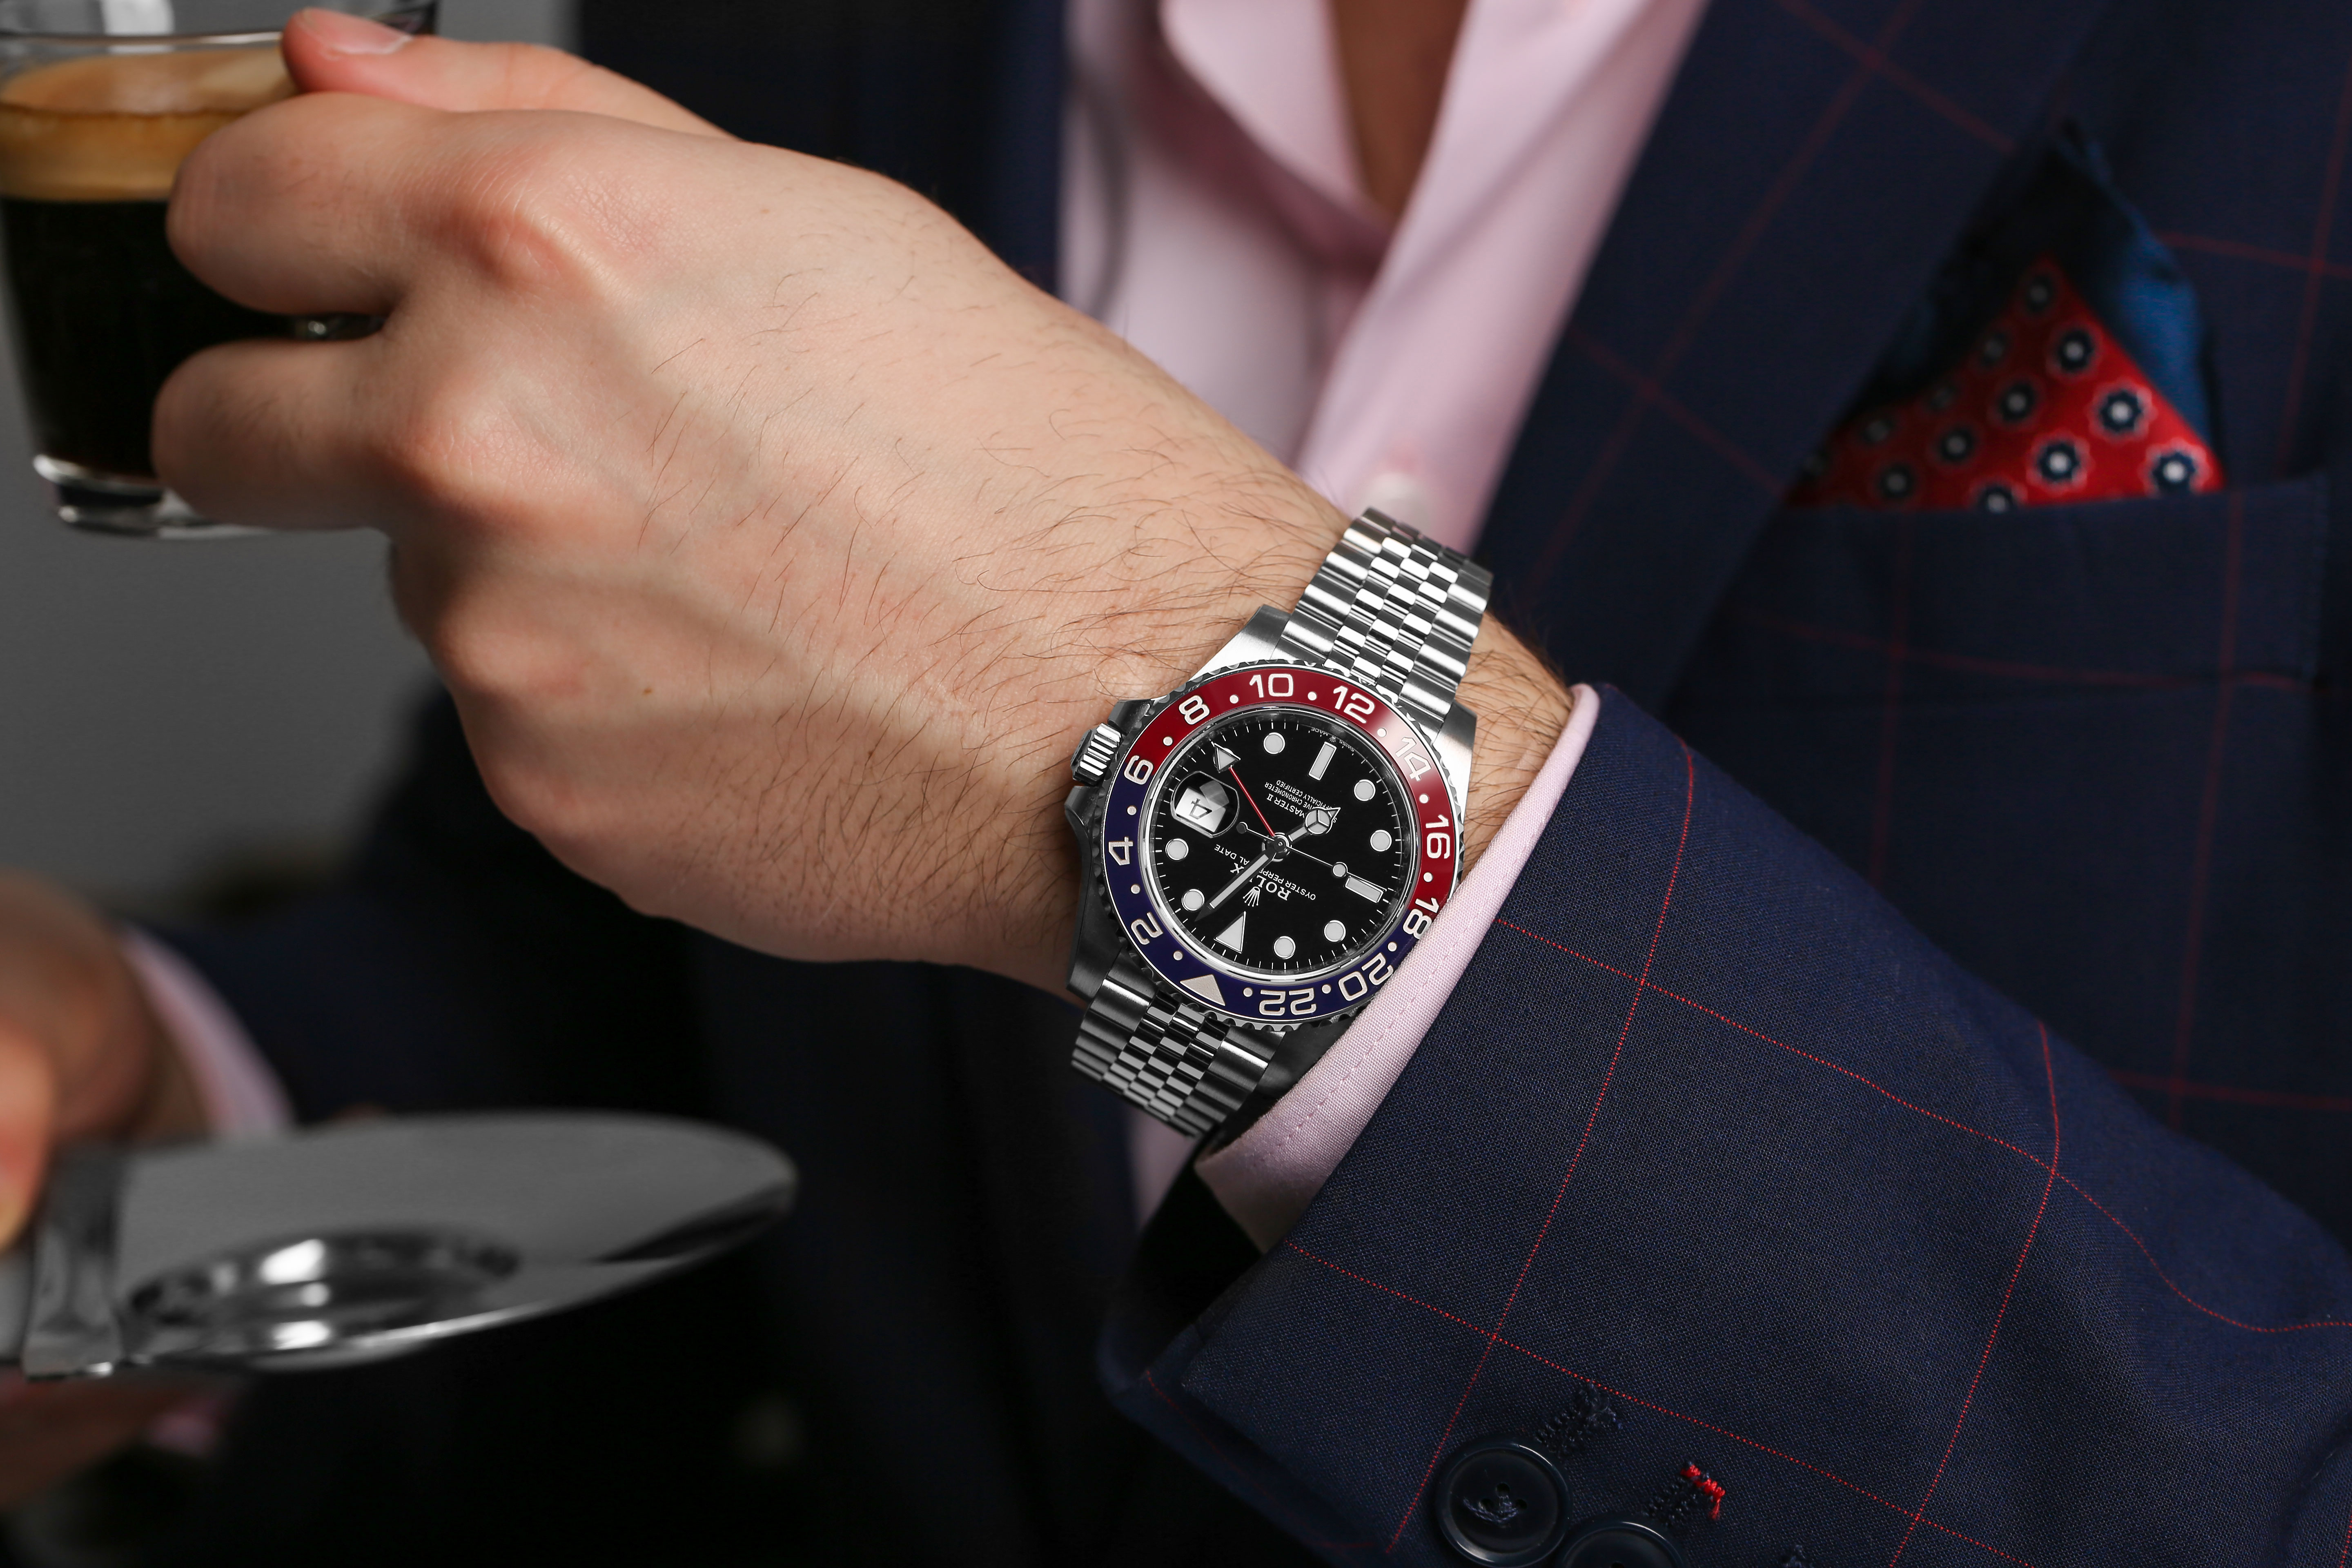 Stainless Steel Timepiece with Black Dial and Two Tone Bezel Sits on a Man’s Wrist who is Drinking Coffee and Wearing a Navy Blue Shirt with Pink Button Down Shirt.